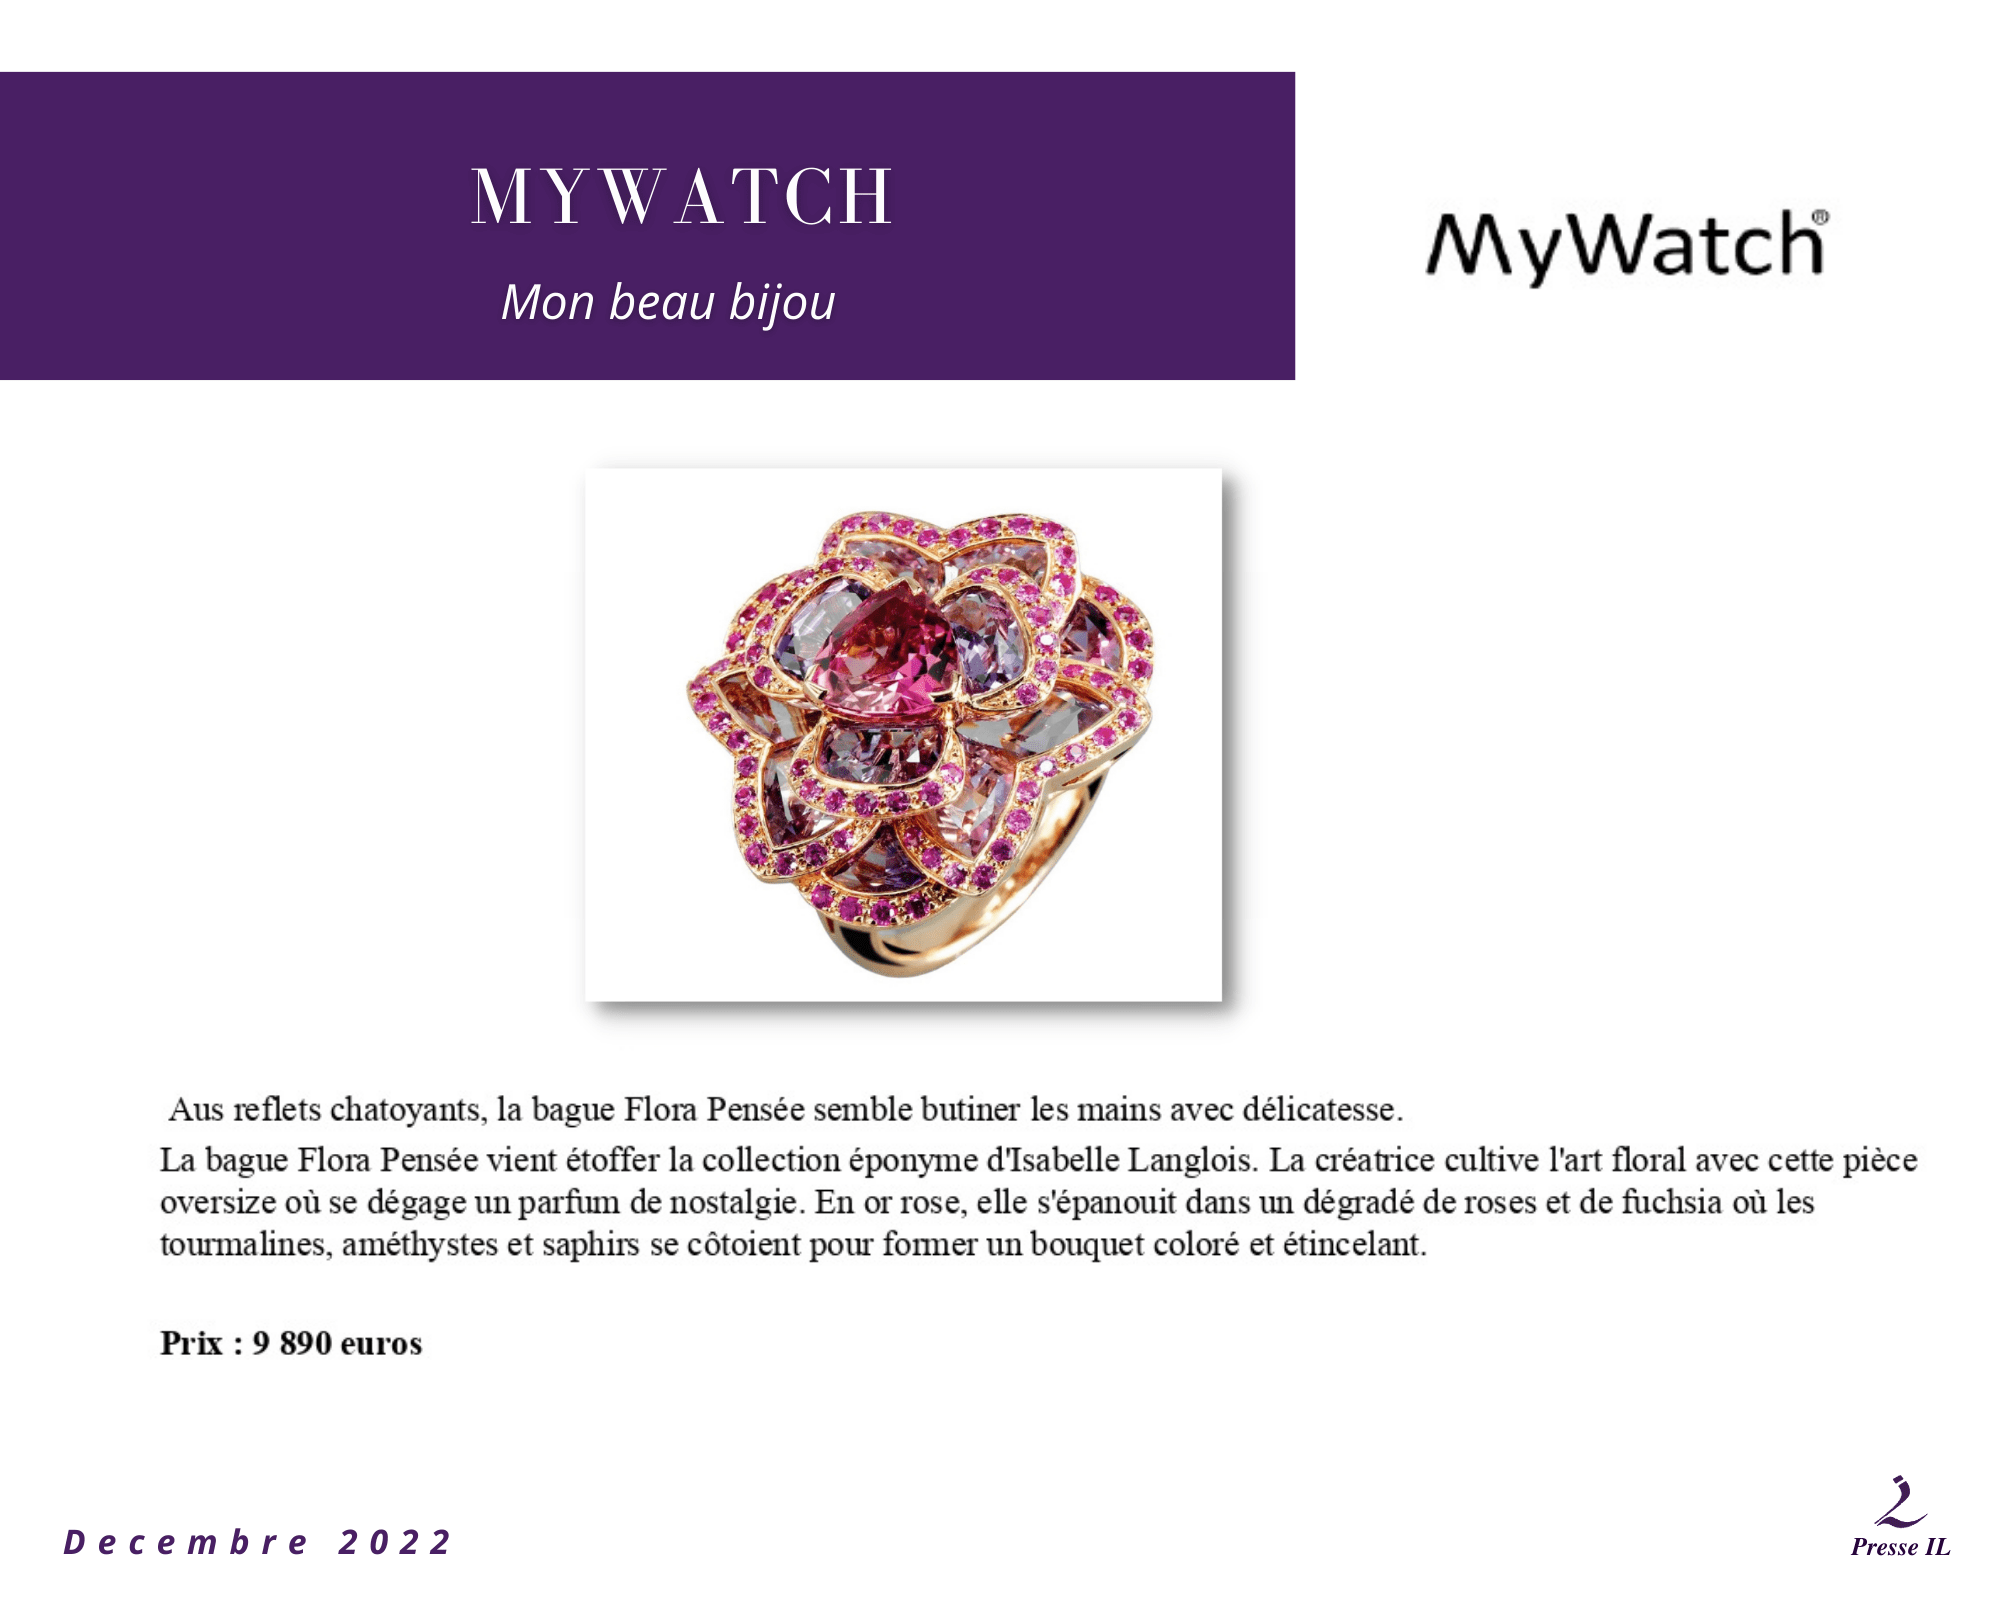 MYWATCH